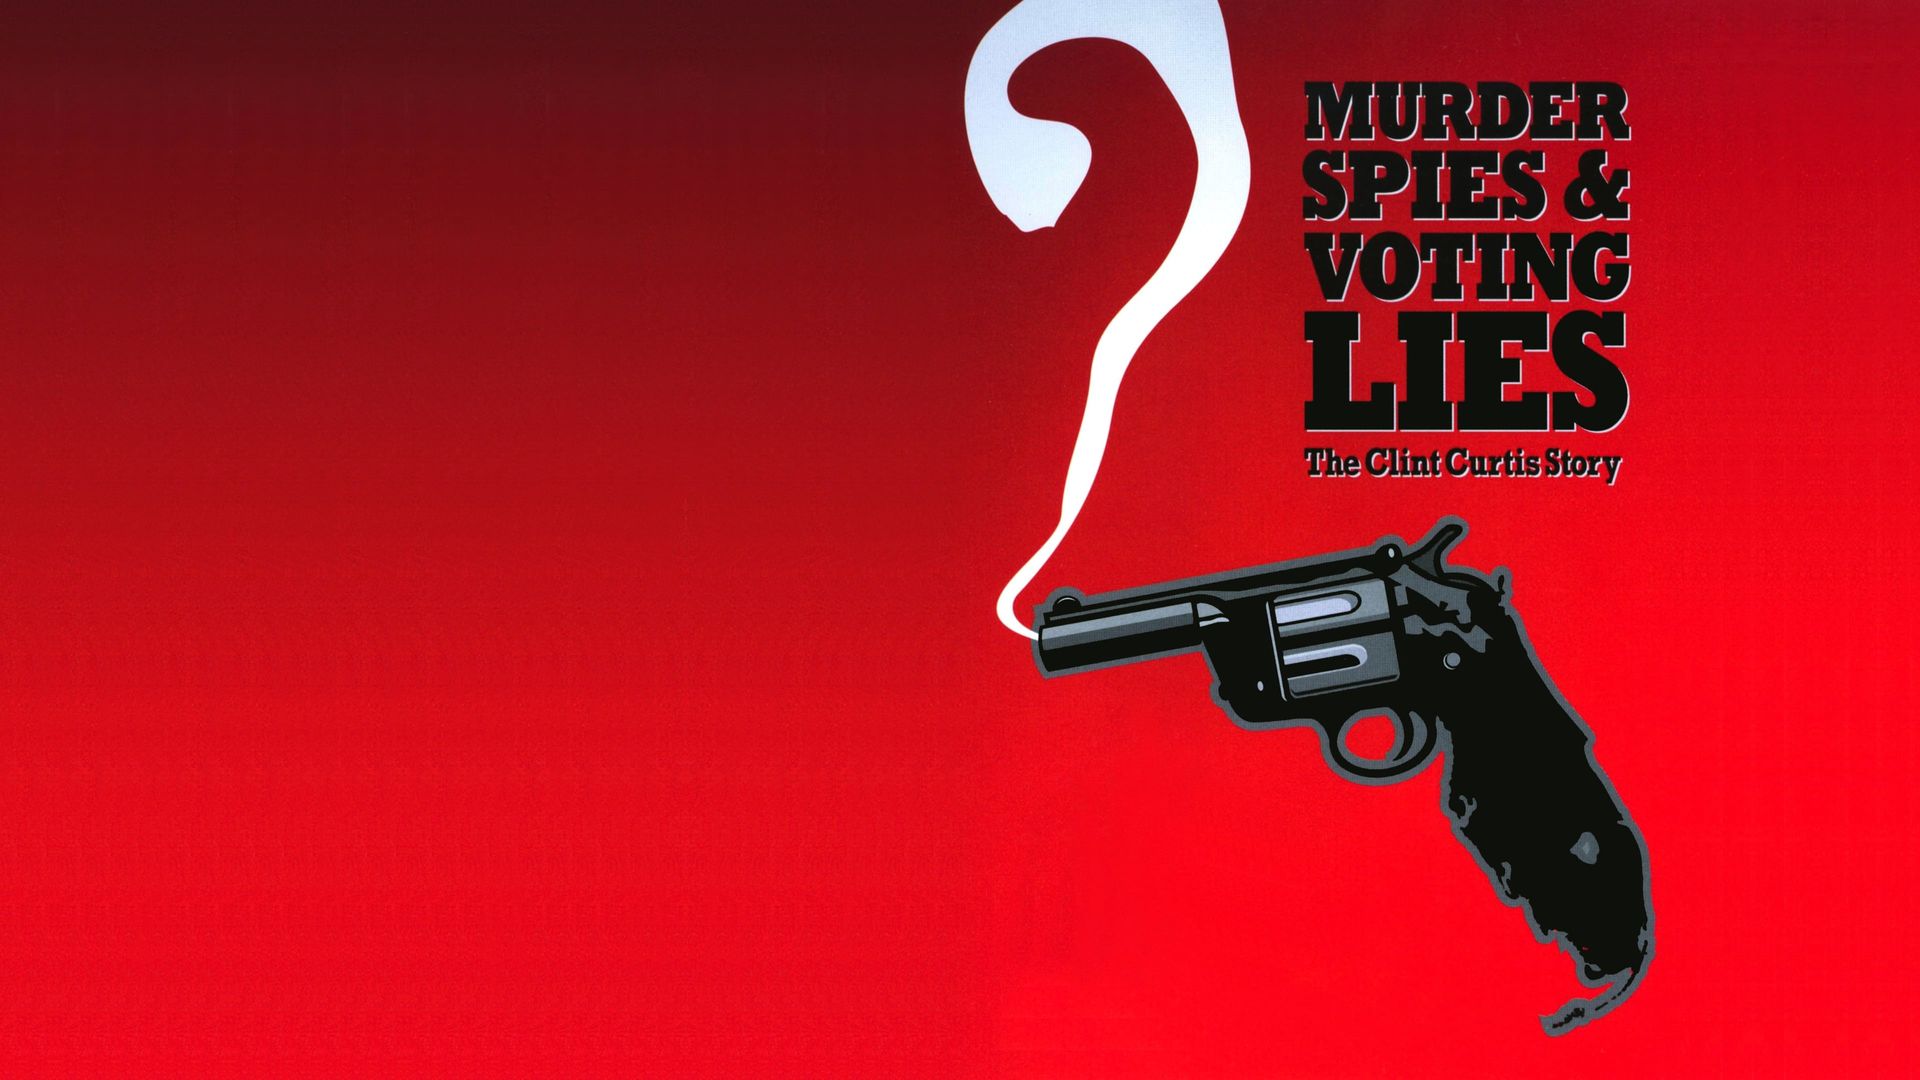 Murder, Spies & Voting Lies: The Clint Curtis Story background